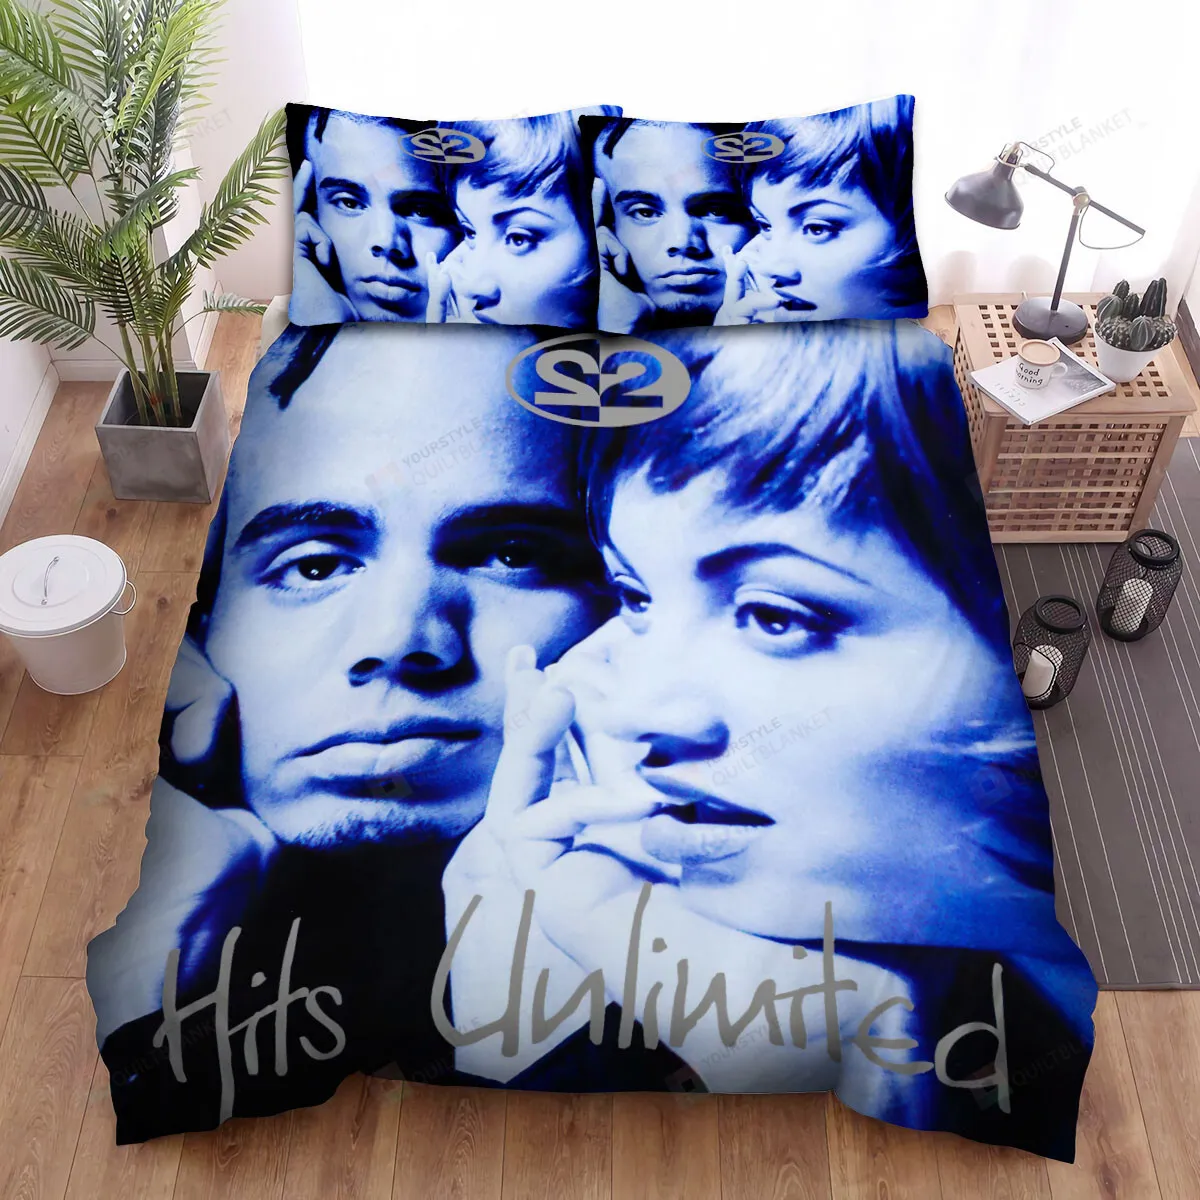 2 Unlimited Hits Unlimited Ver 2 Bed Sheets Spread Comforter Duvet Cover Bedding Sets